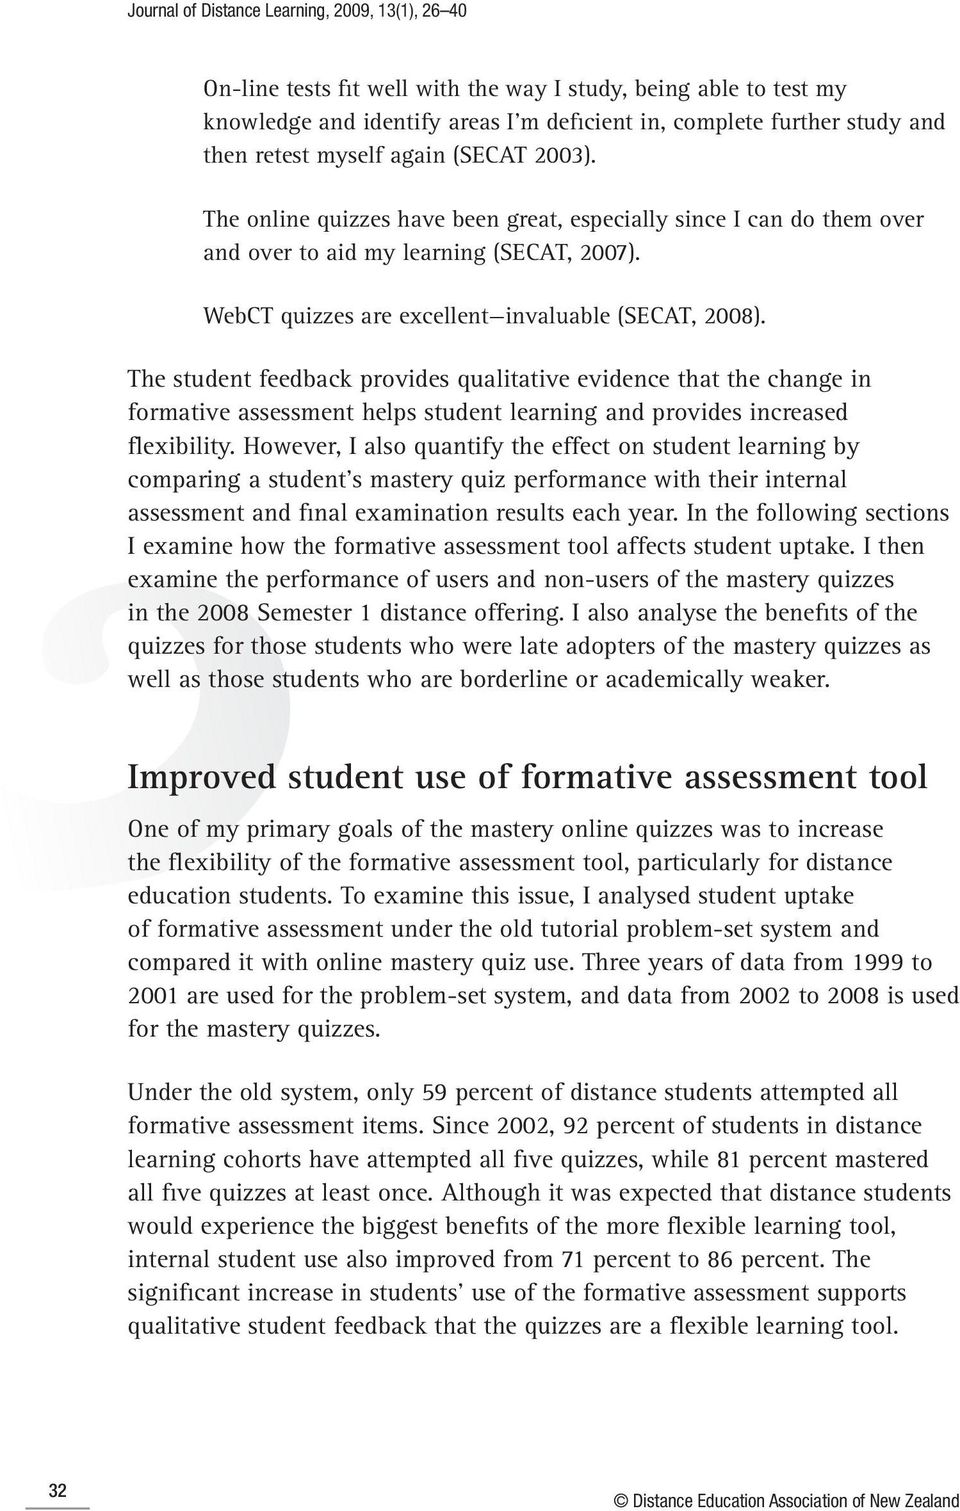 The student feedback provides qualitative evidence that the change in formative assessment helps student learning and provides increased flexibility.